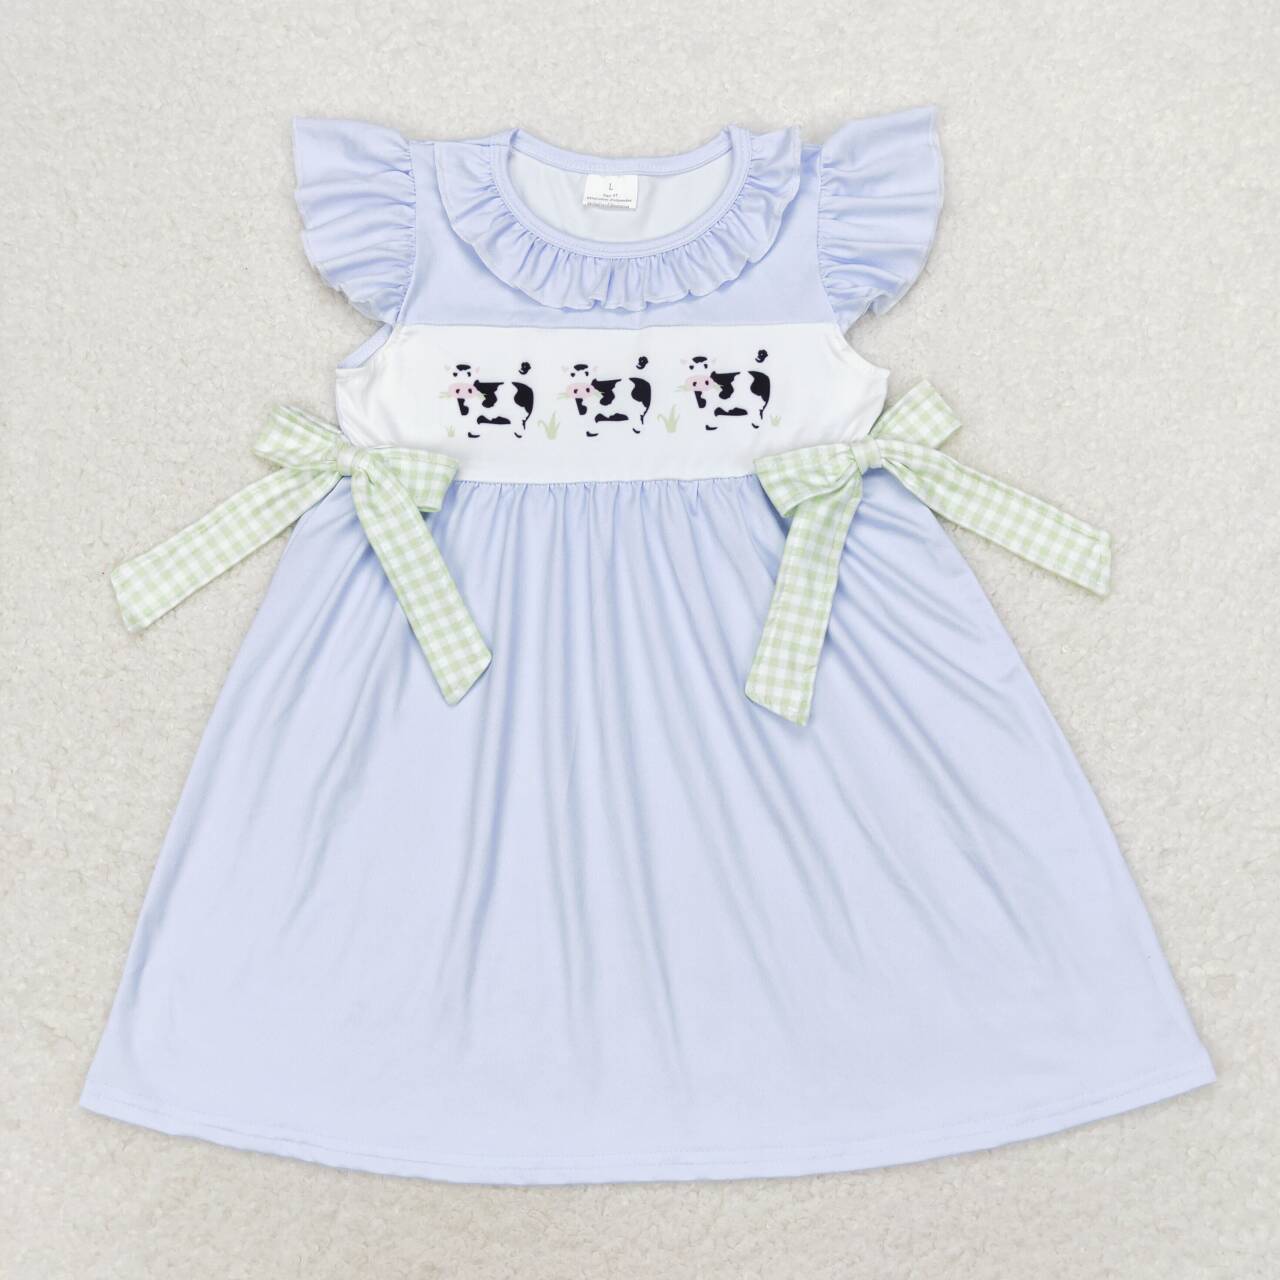 RTS no moq GSD1252 Baby girl summer clothes flying sleeves top kids dress